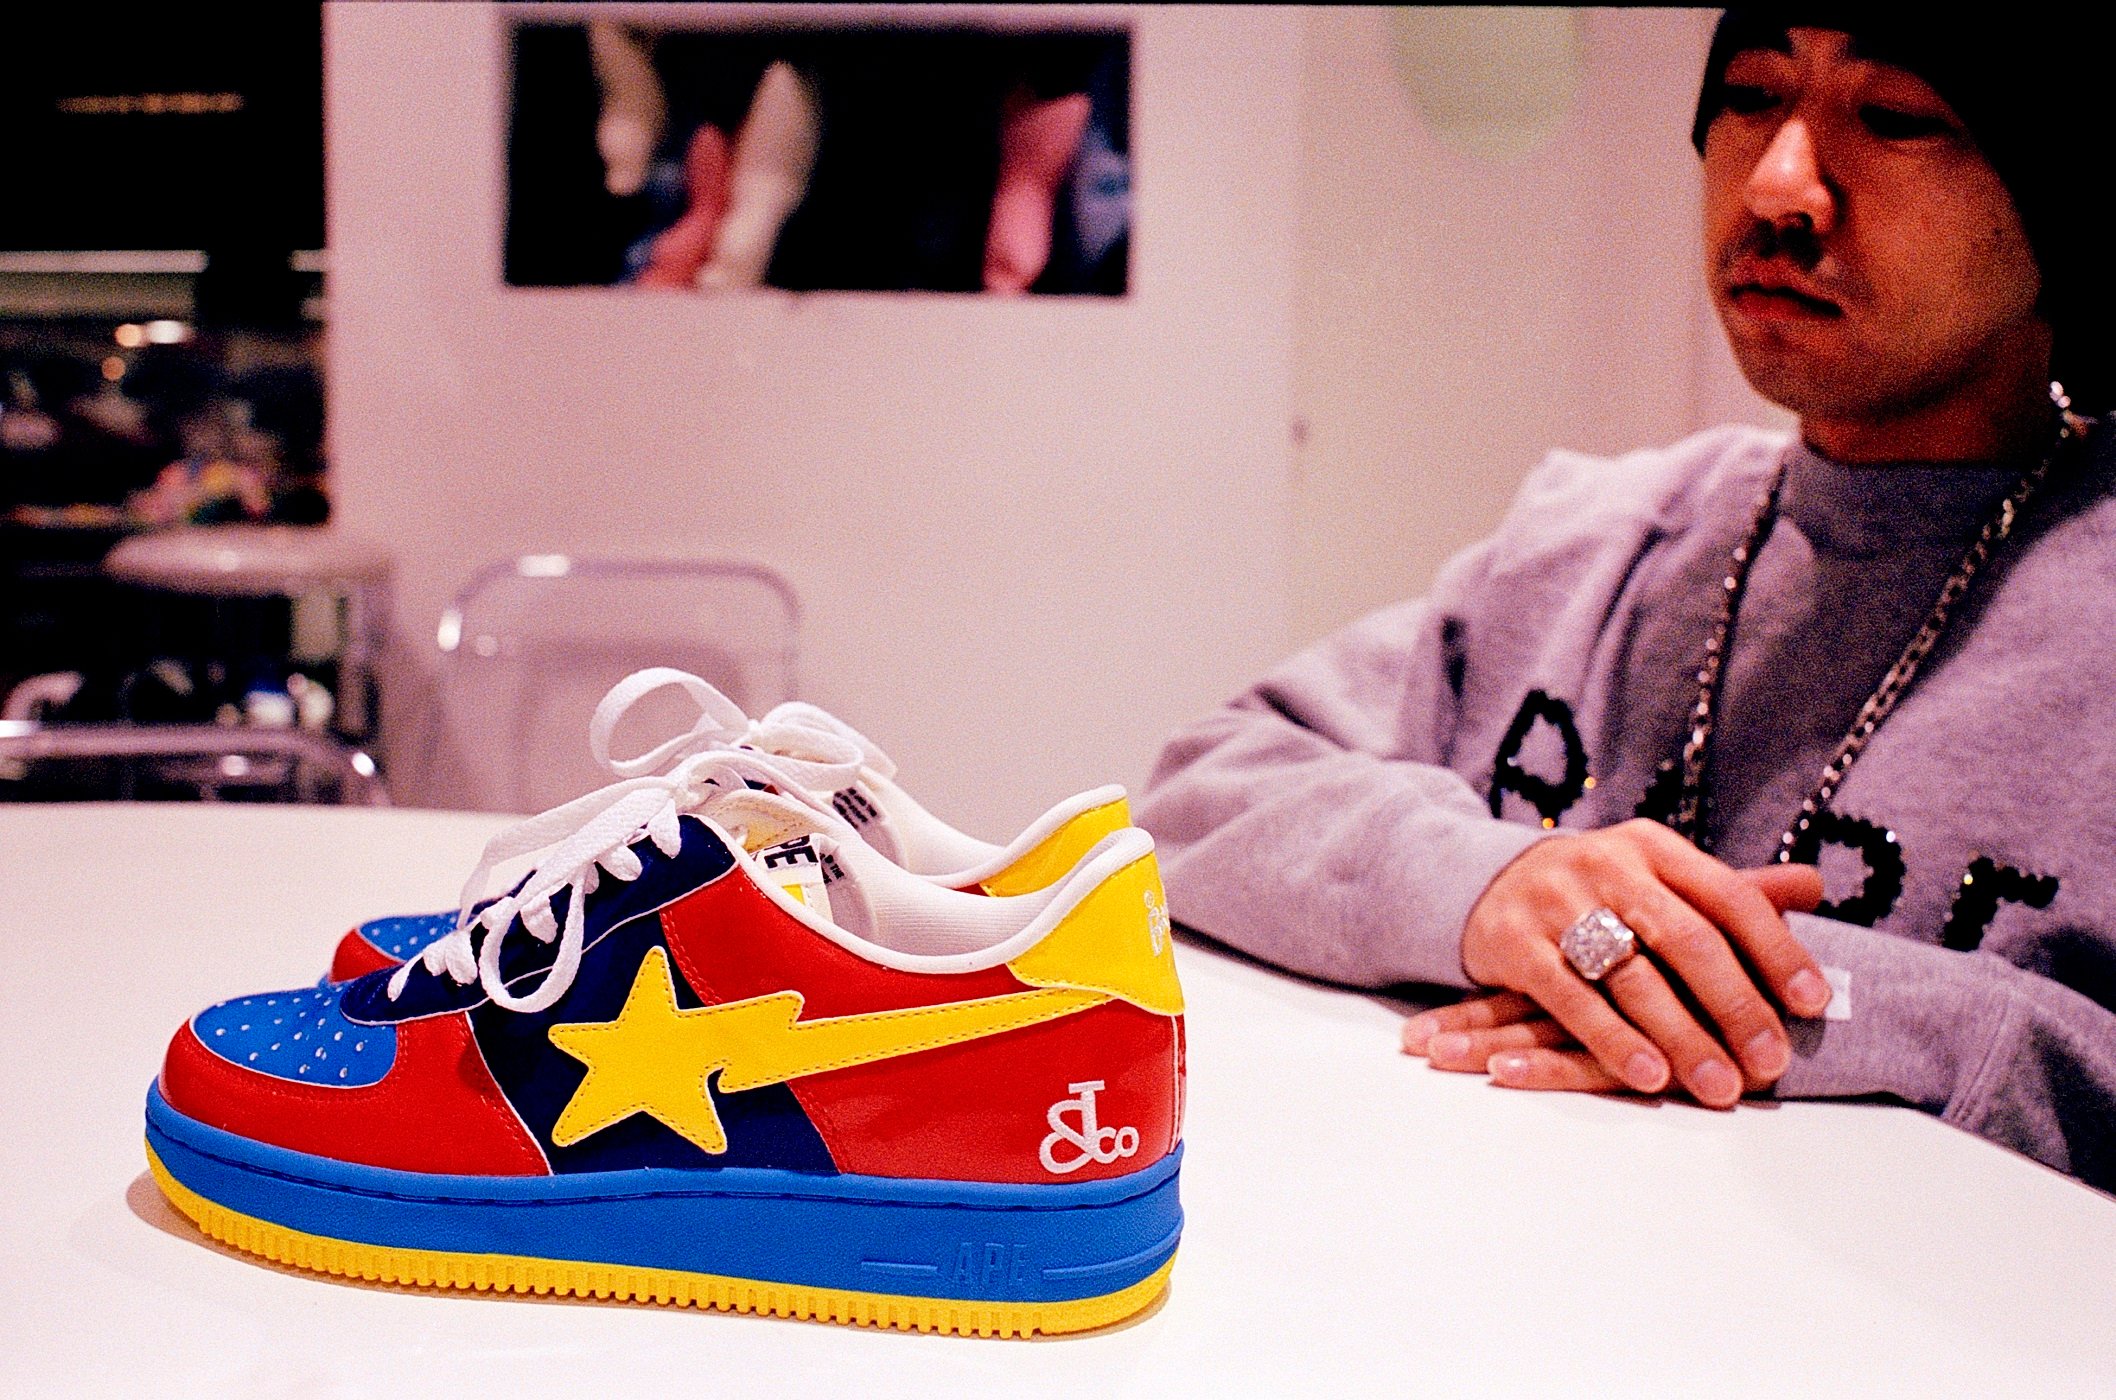 Nigo sits with a version of the Bapesta sneaker in 2004